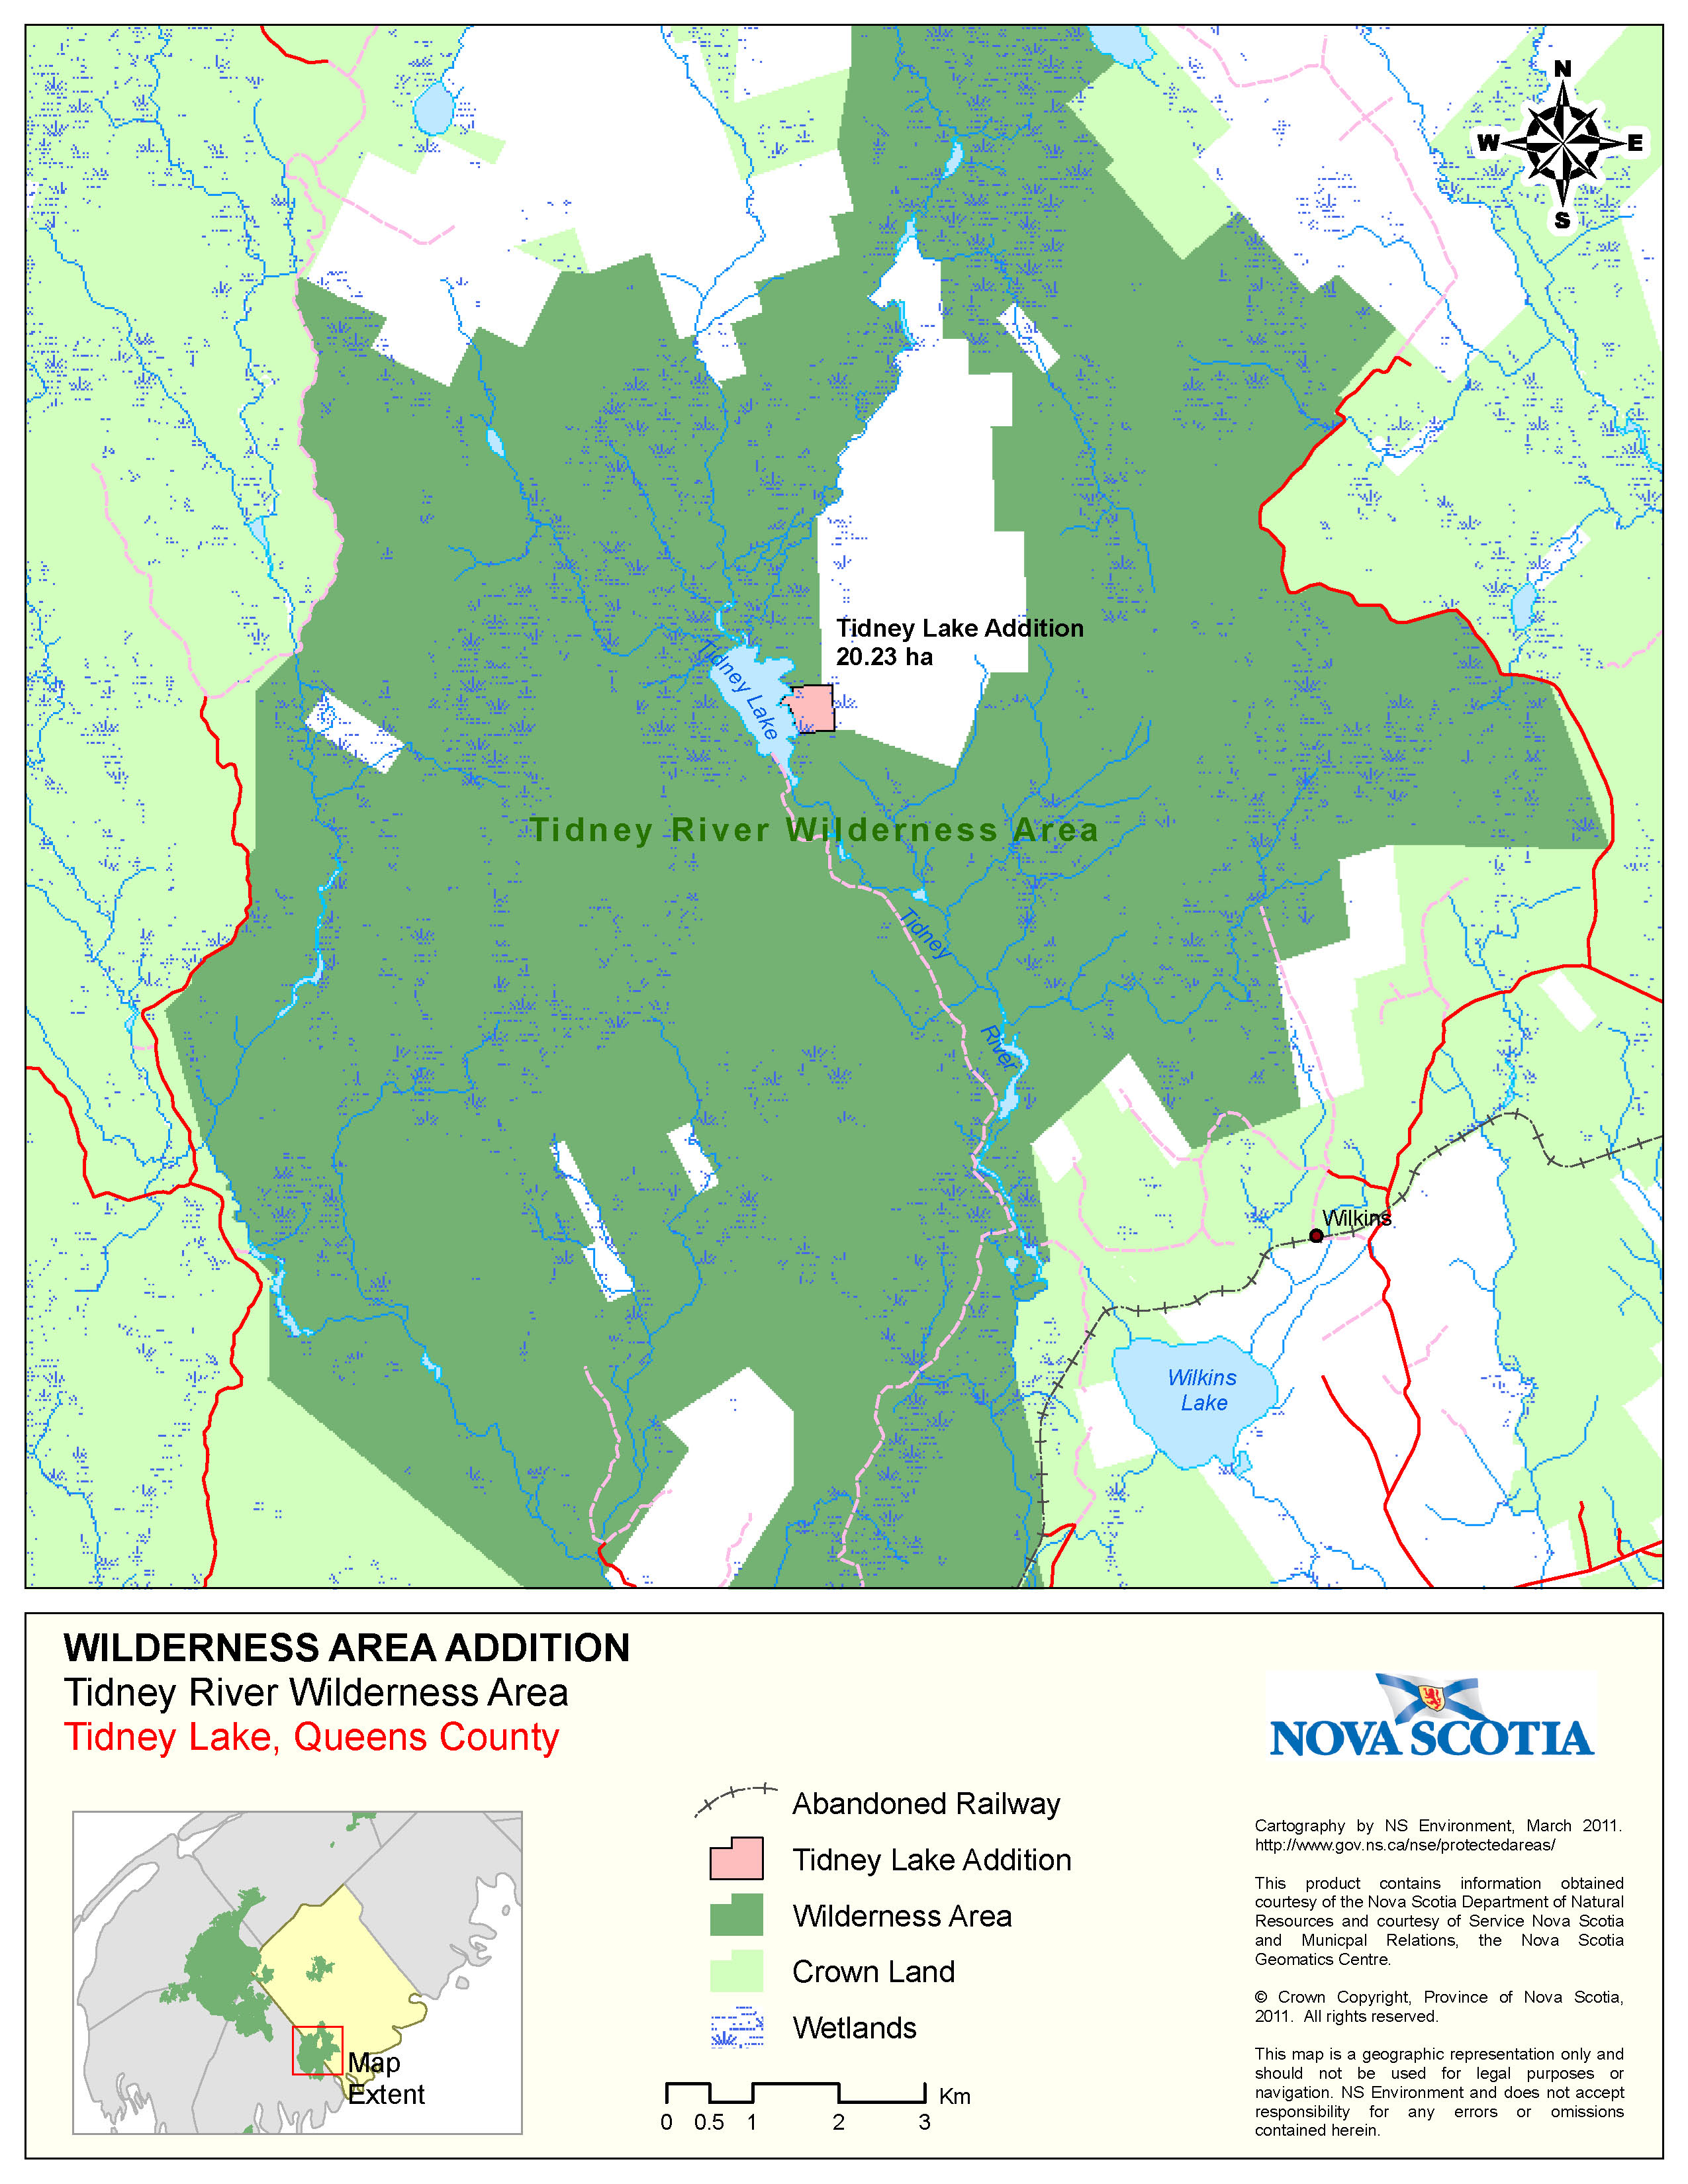 Approximate Boundaries of Crown Land at Tidney [Lake], Queens County